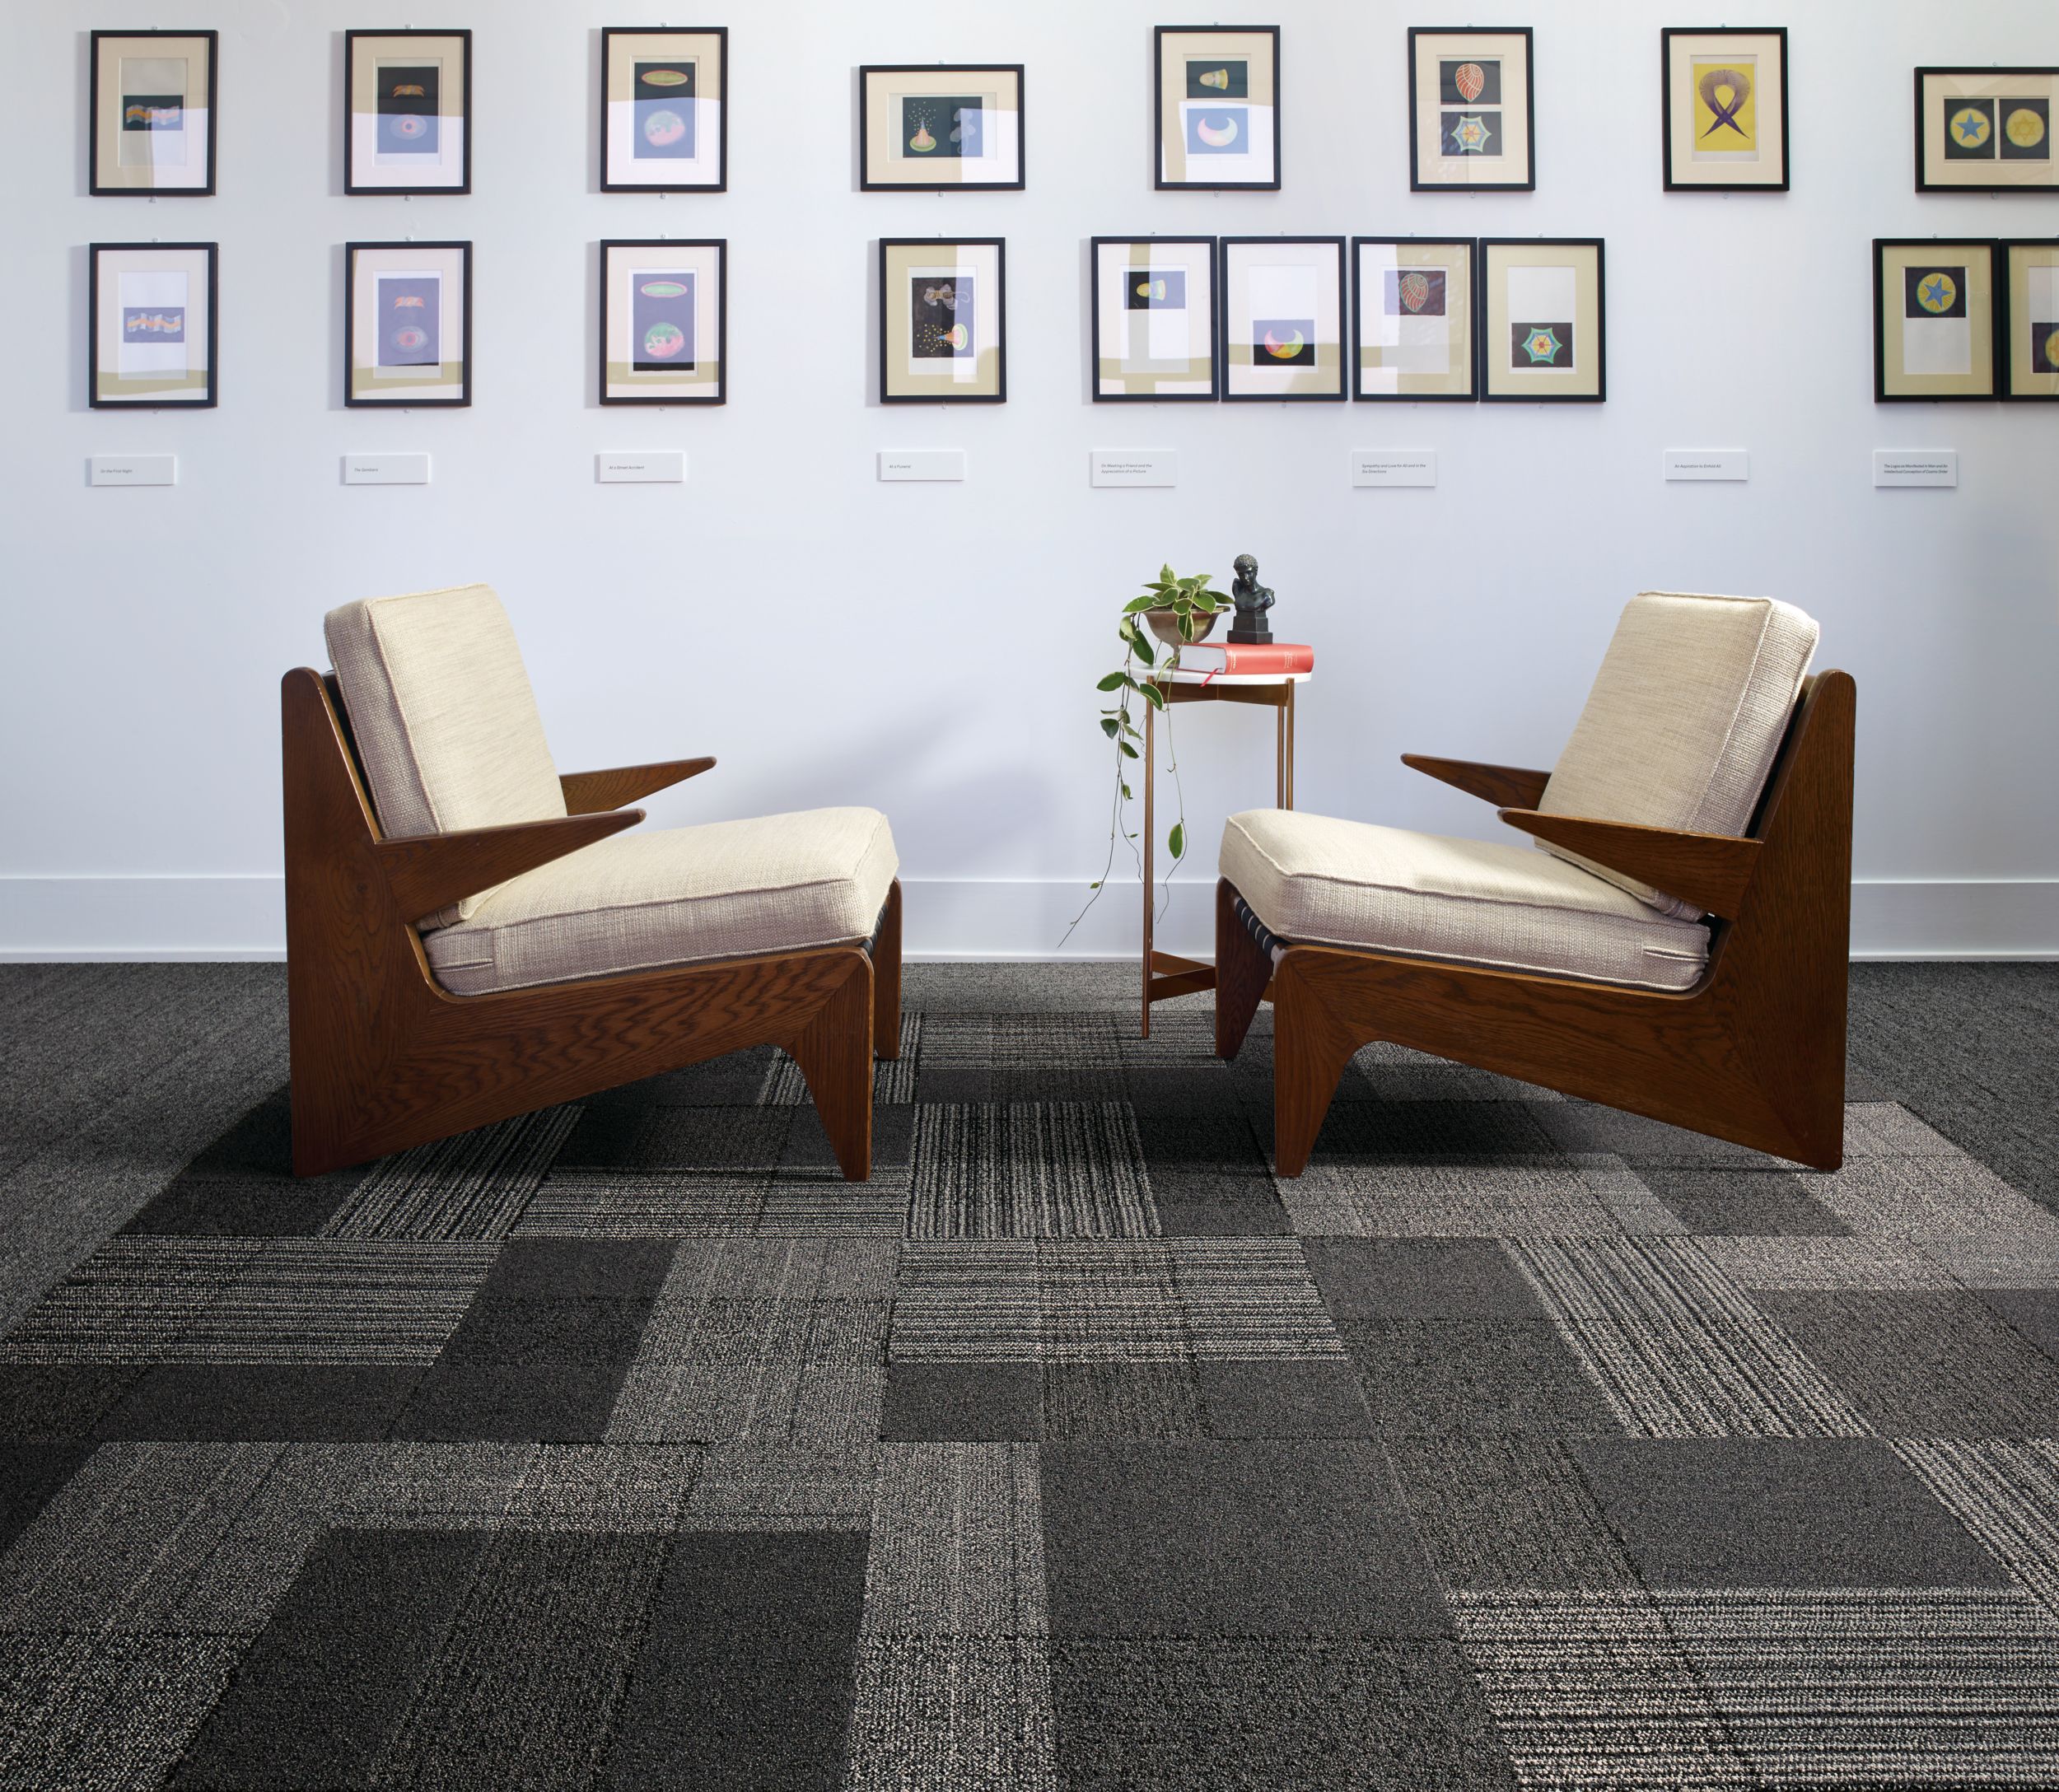 Interface ShadowBox Velour carpet tile and WW860 plank carpet tile in seating area with two chairs and a lot of small prints on the wall número de imagen 6